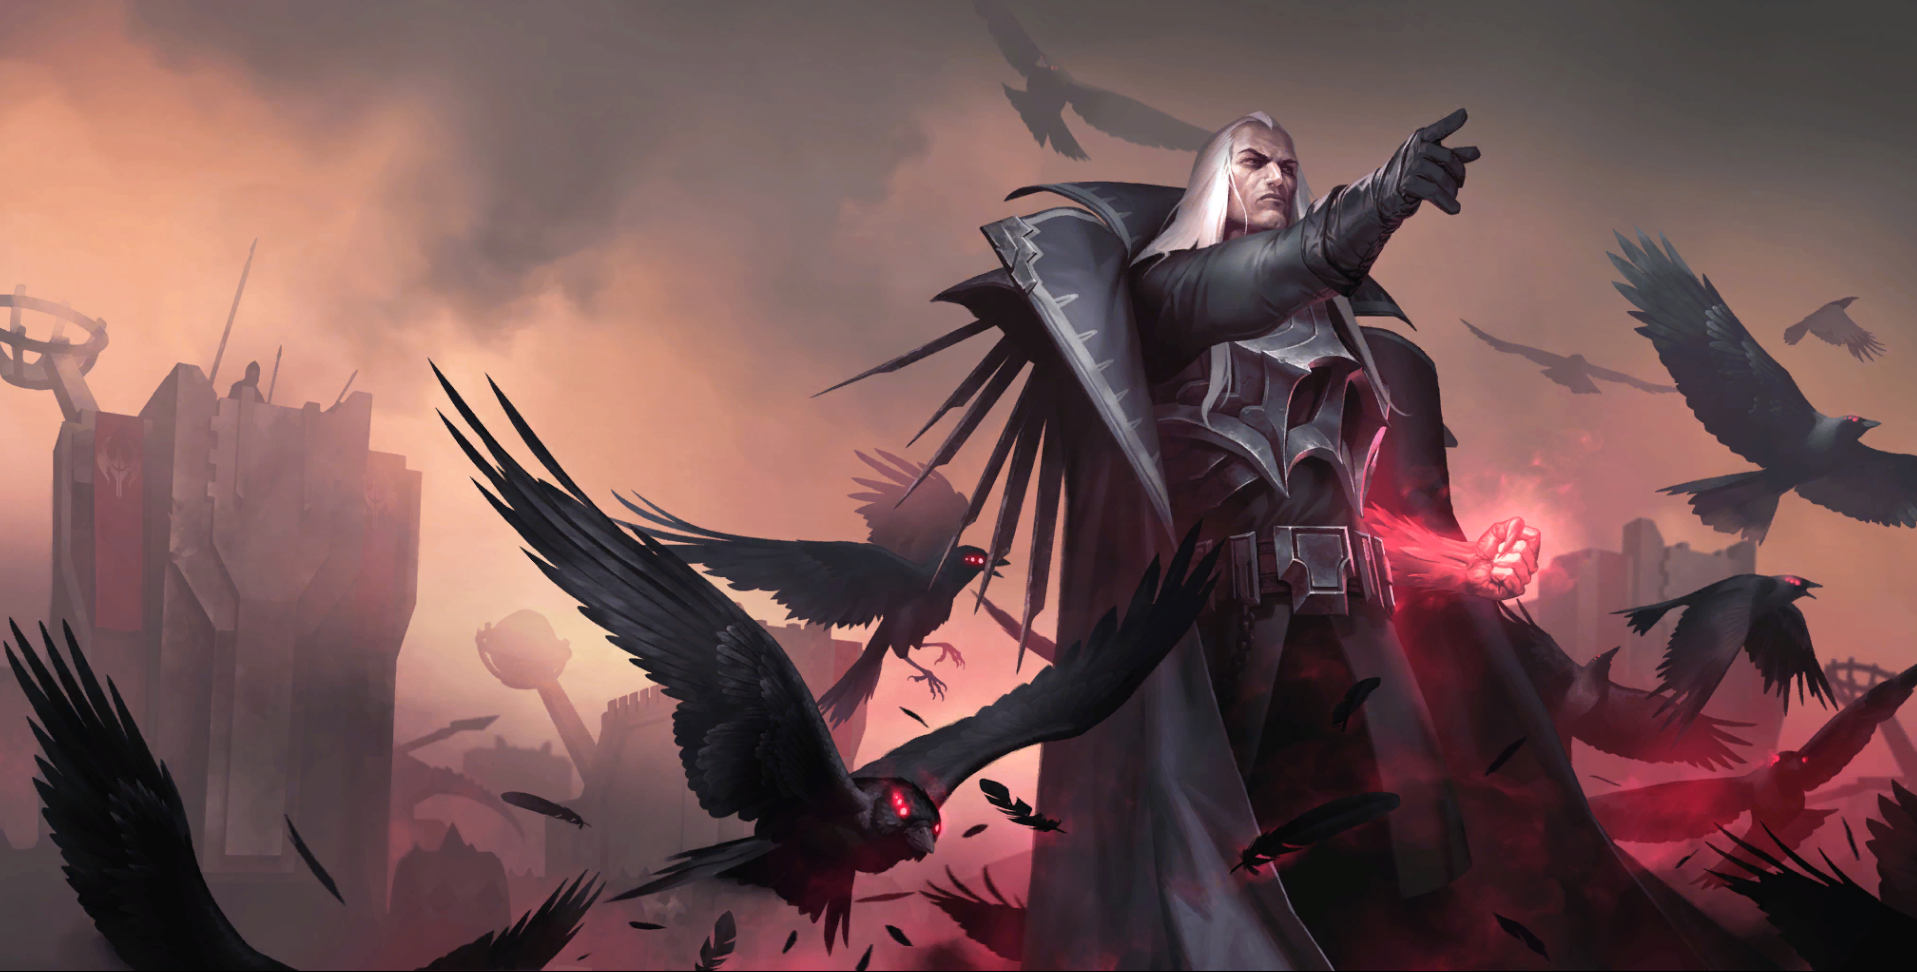 Swain commands the Citybreakers behind him as a murder of crows takes flight.